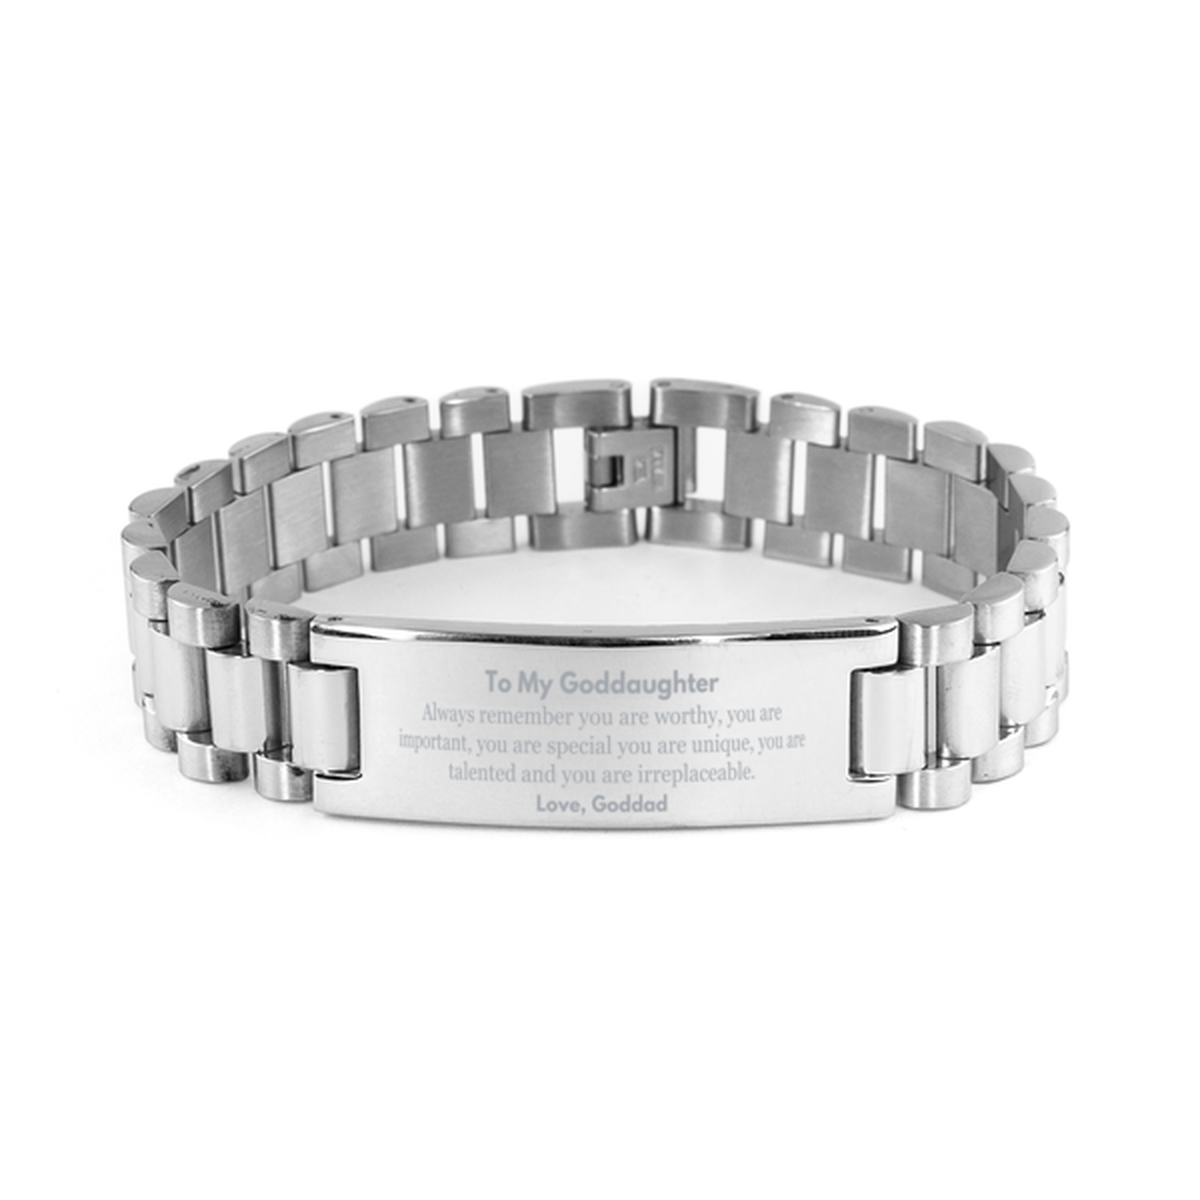 Goddaughter Birthday Gifts from Goddad, Inspirational Ladder Stainless Steel Bracelet for Goddaughter Christmas Graduation Gifts for Goddaughter Always remember you are worthy, you are important. Love, Goddad